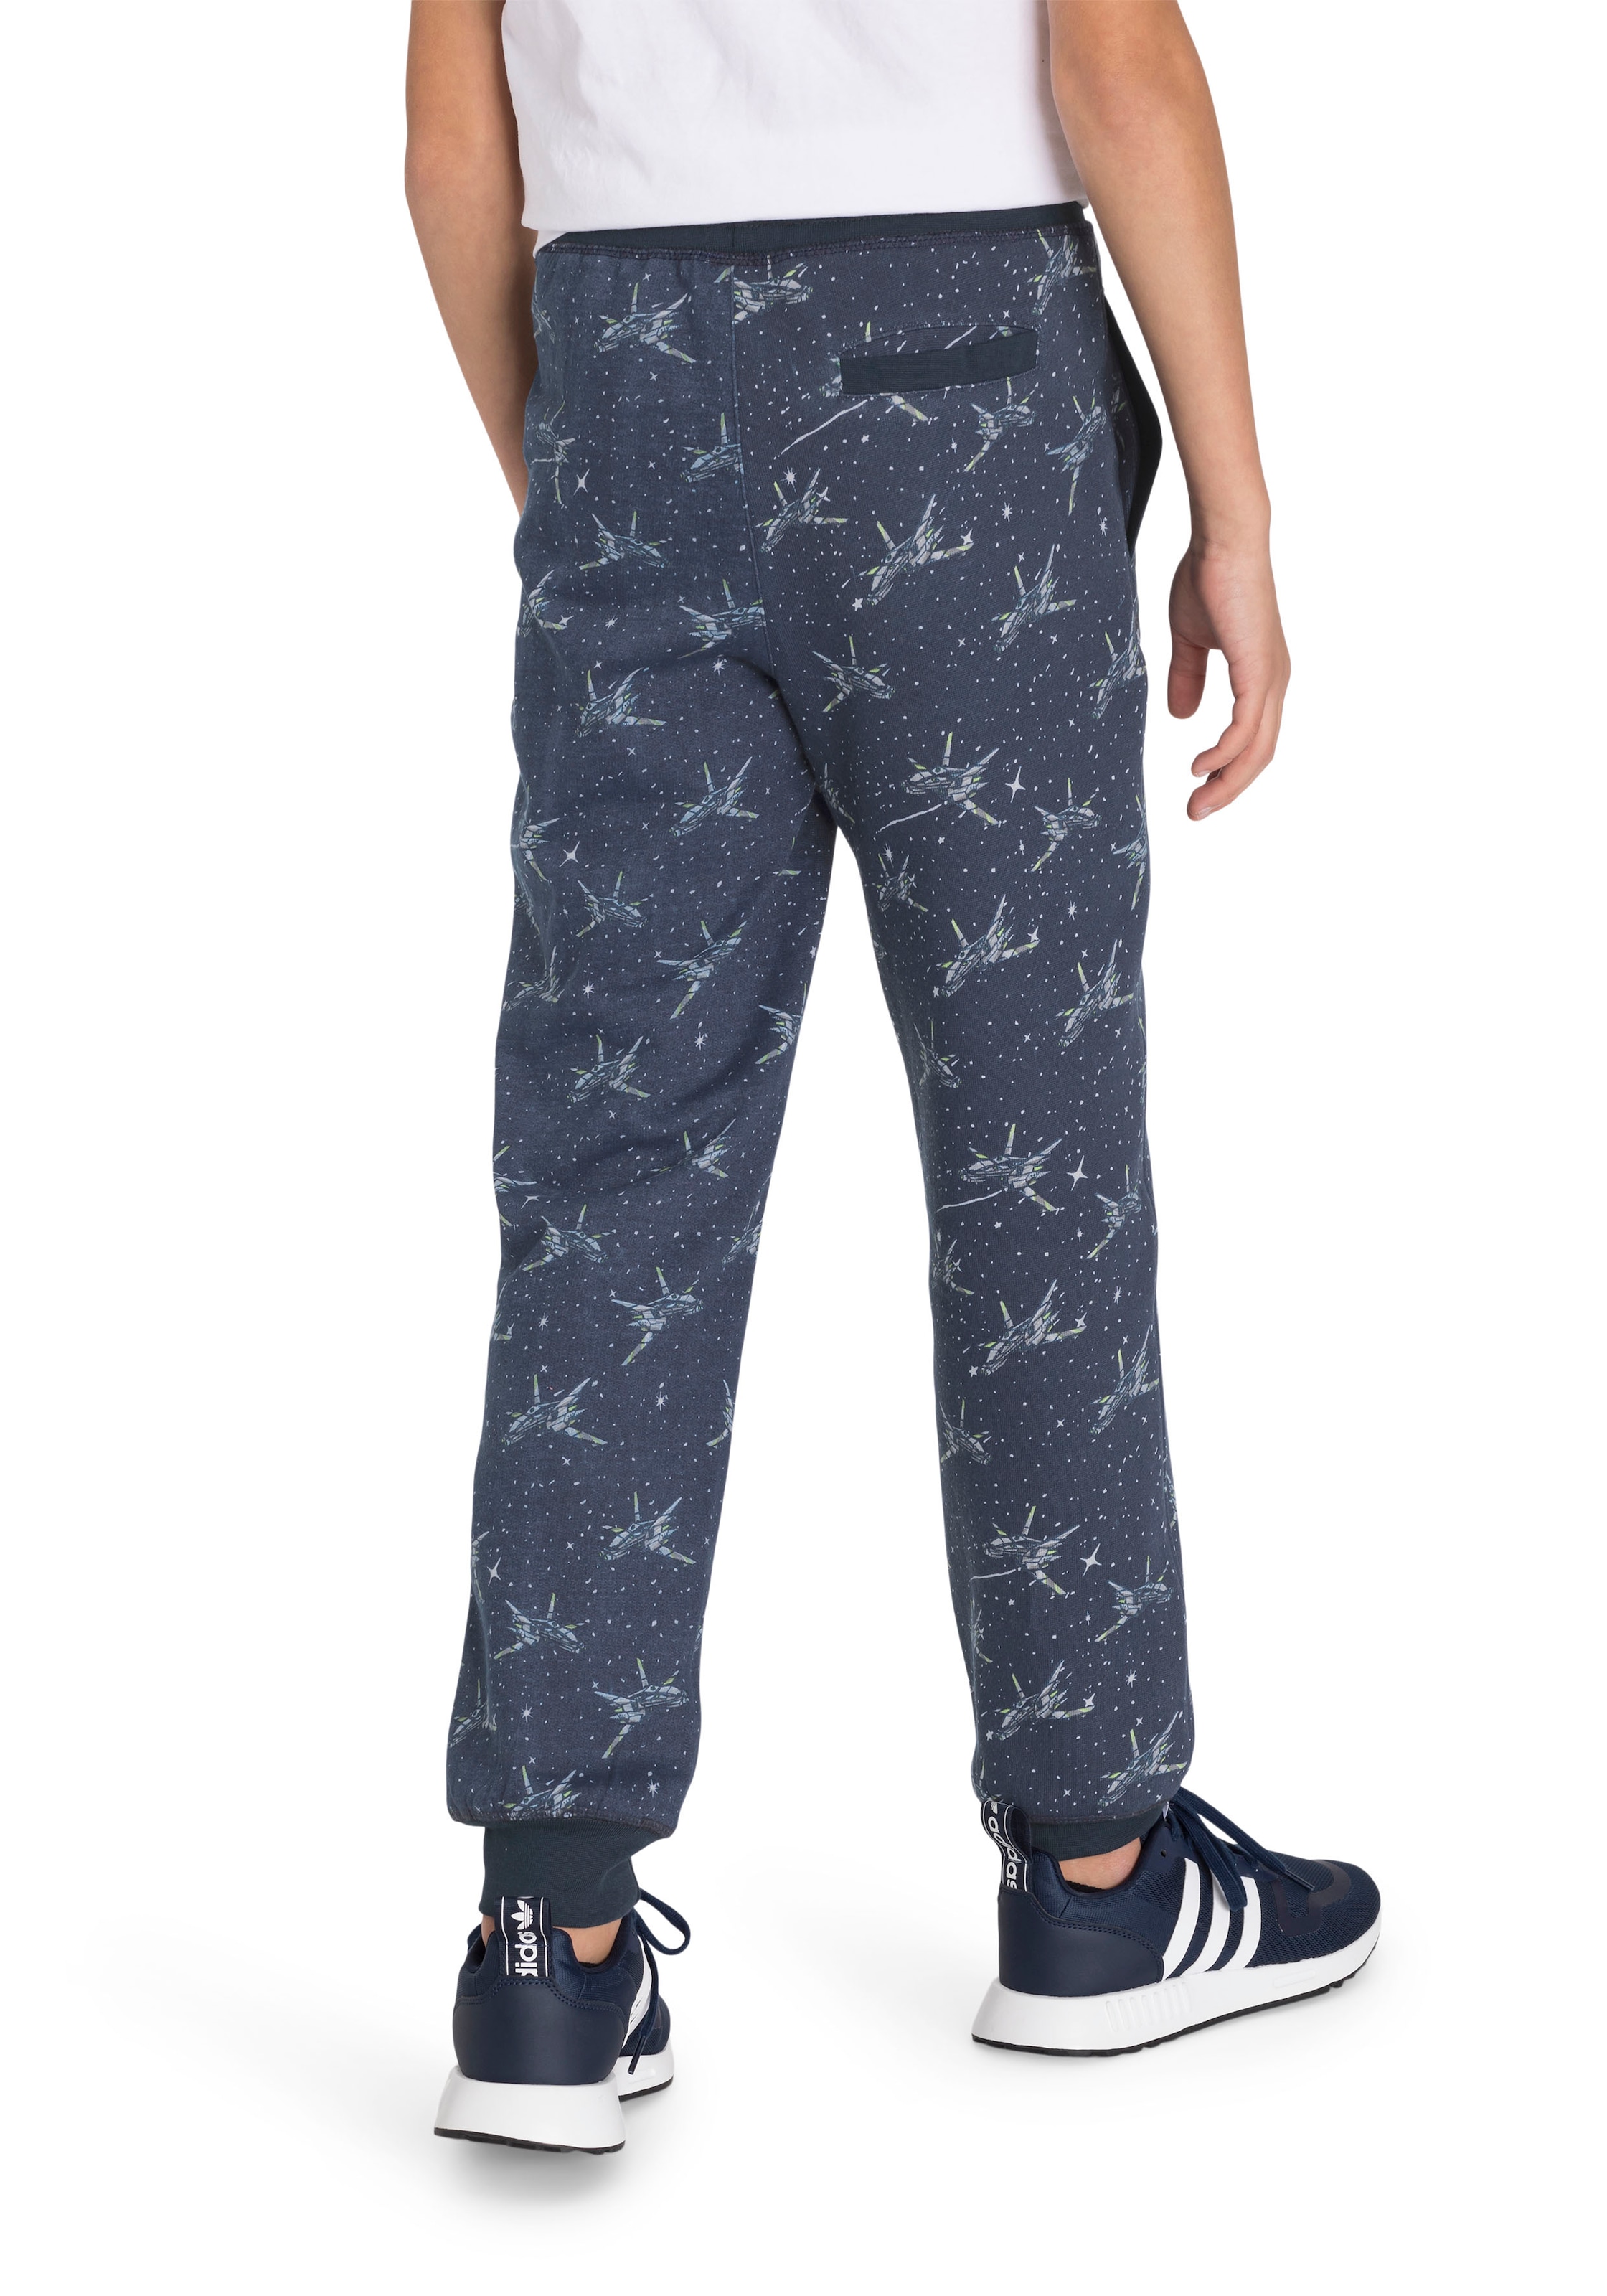 Scout Jogginghose »SPACE«, (Packung, 2er-Pack), aus bei Baumwollmischung